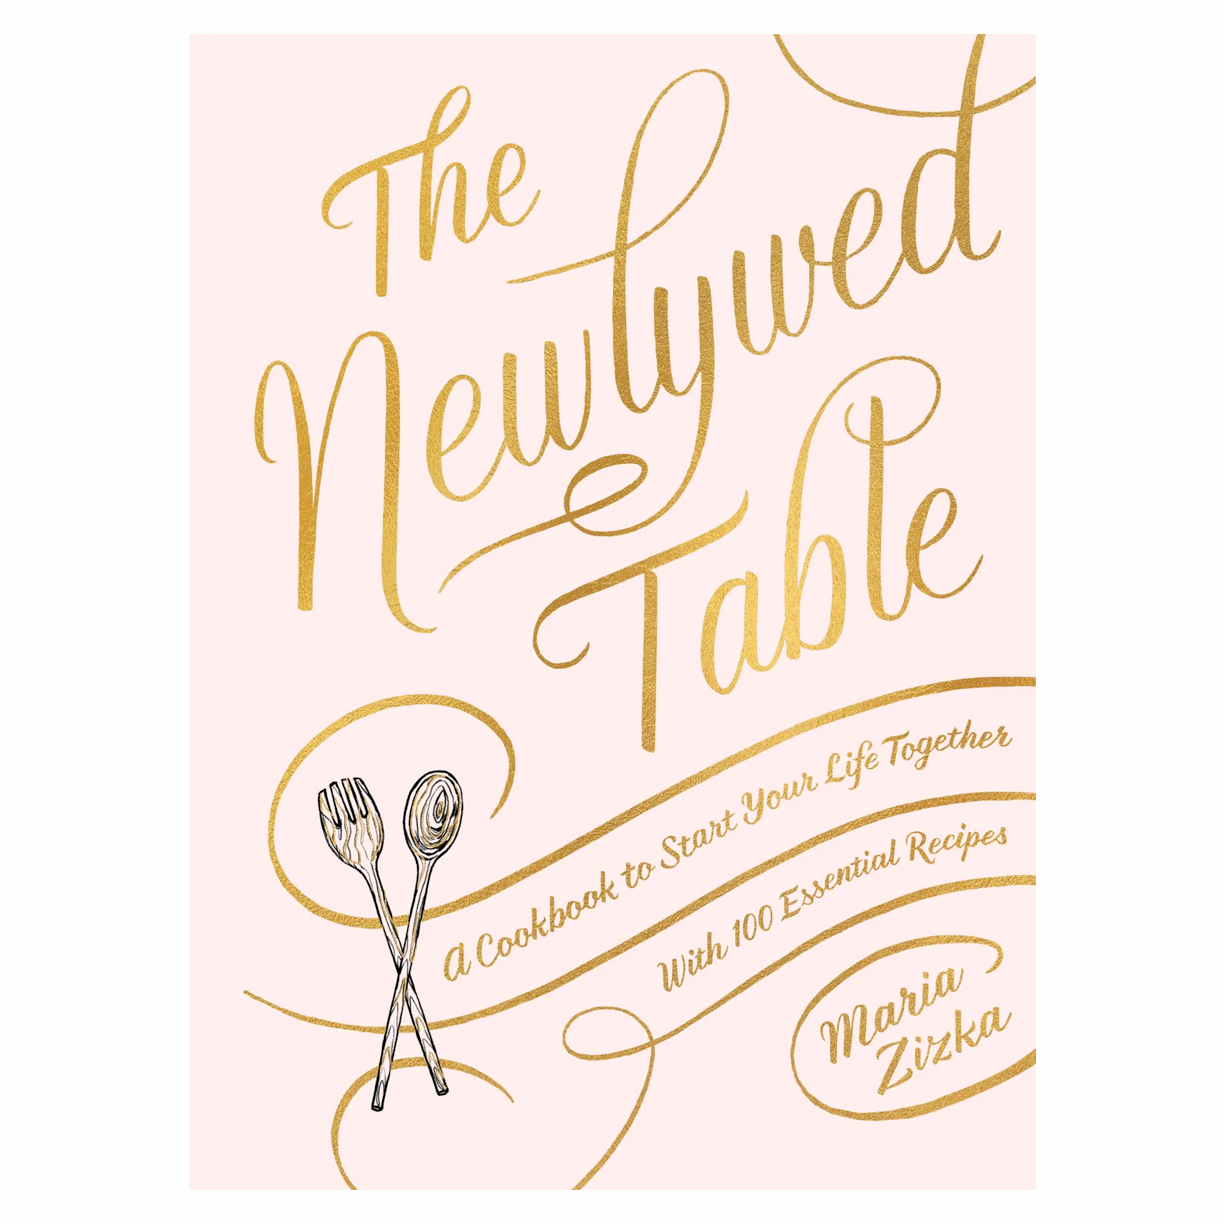 The Newlywed Table, Hachette - RSVP Style